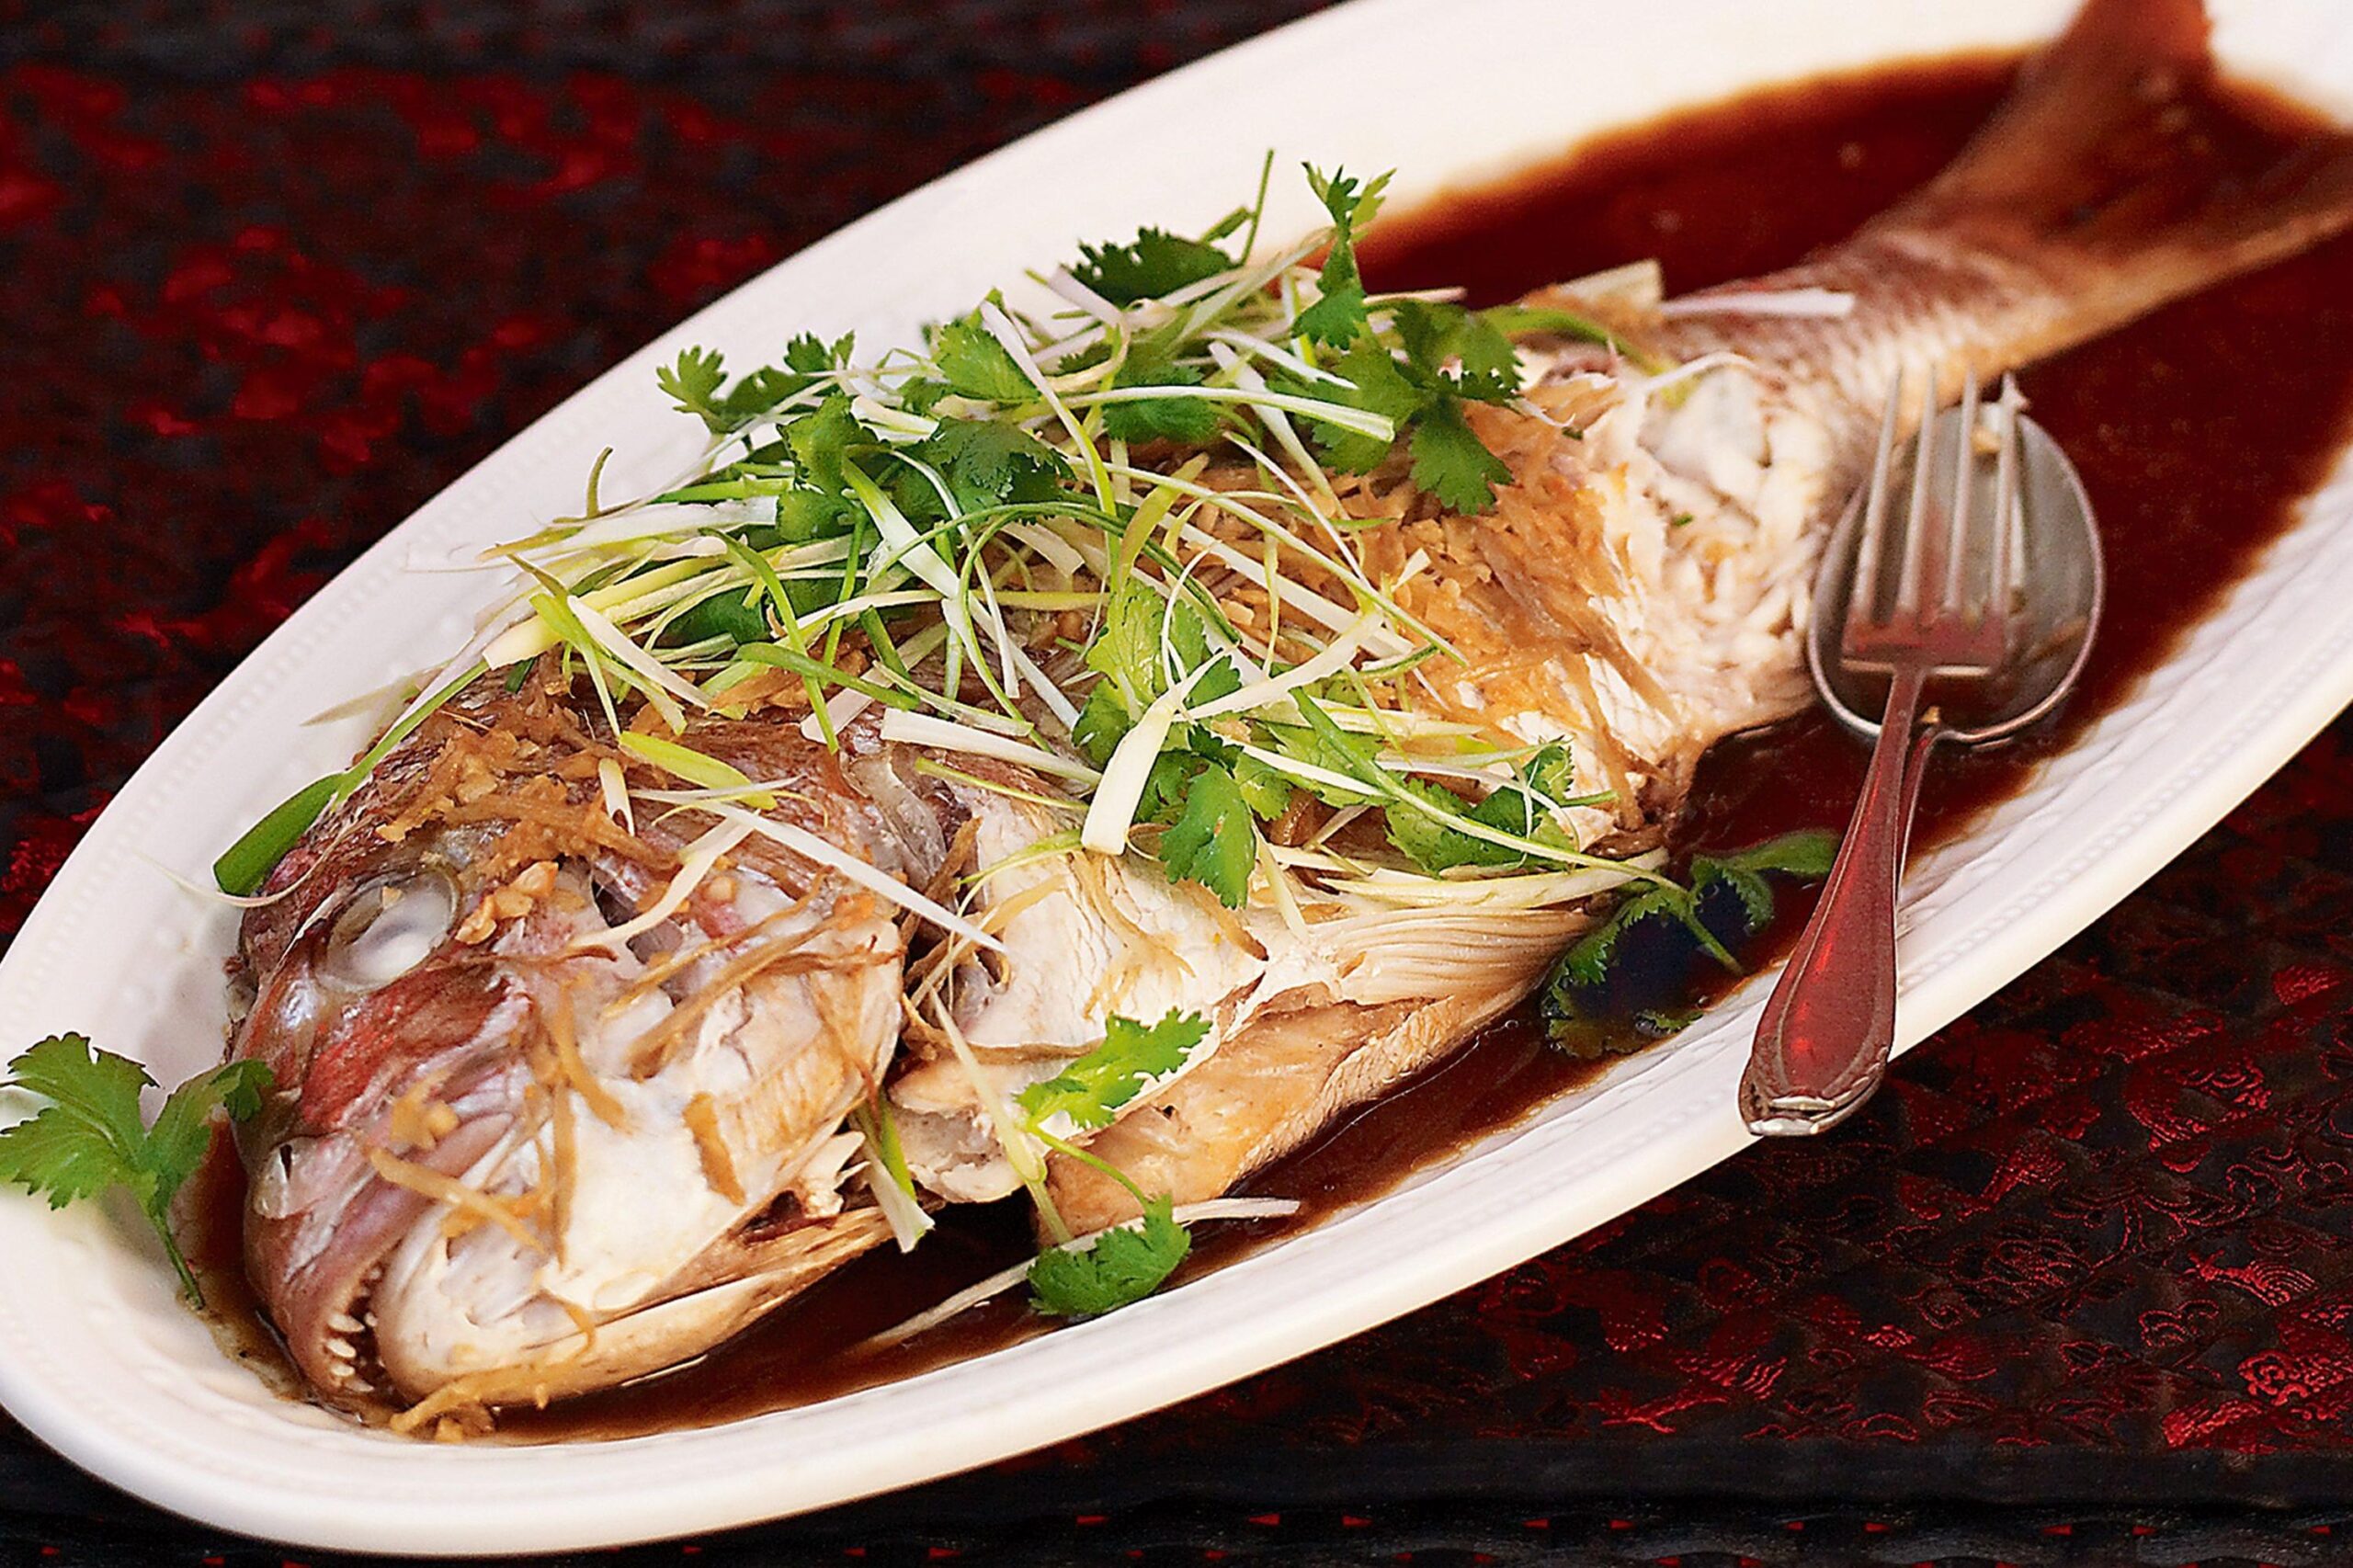  Dare to try this scrumptious red snapper recipe?